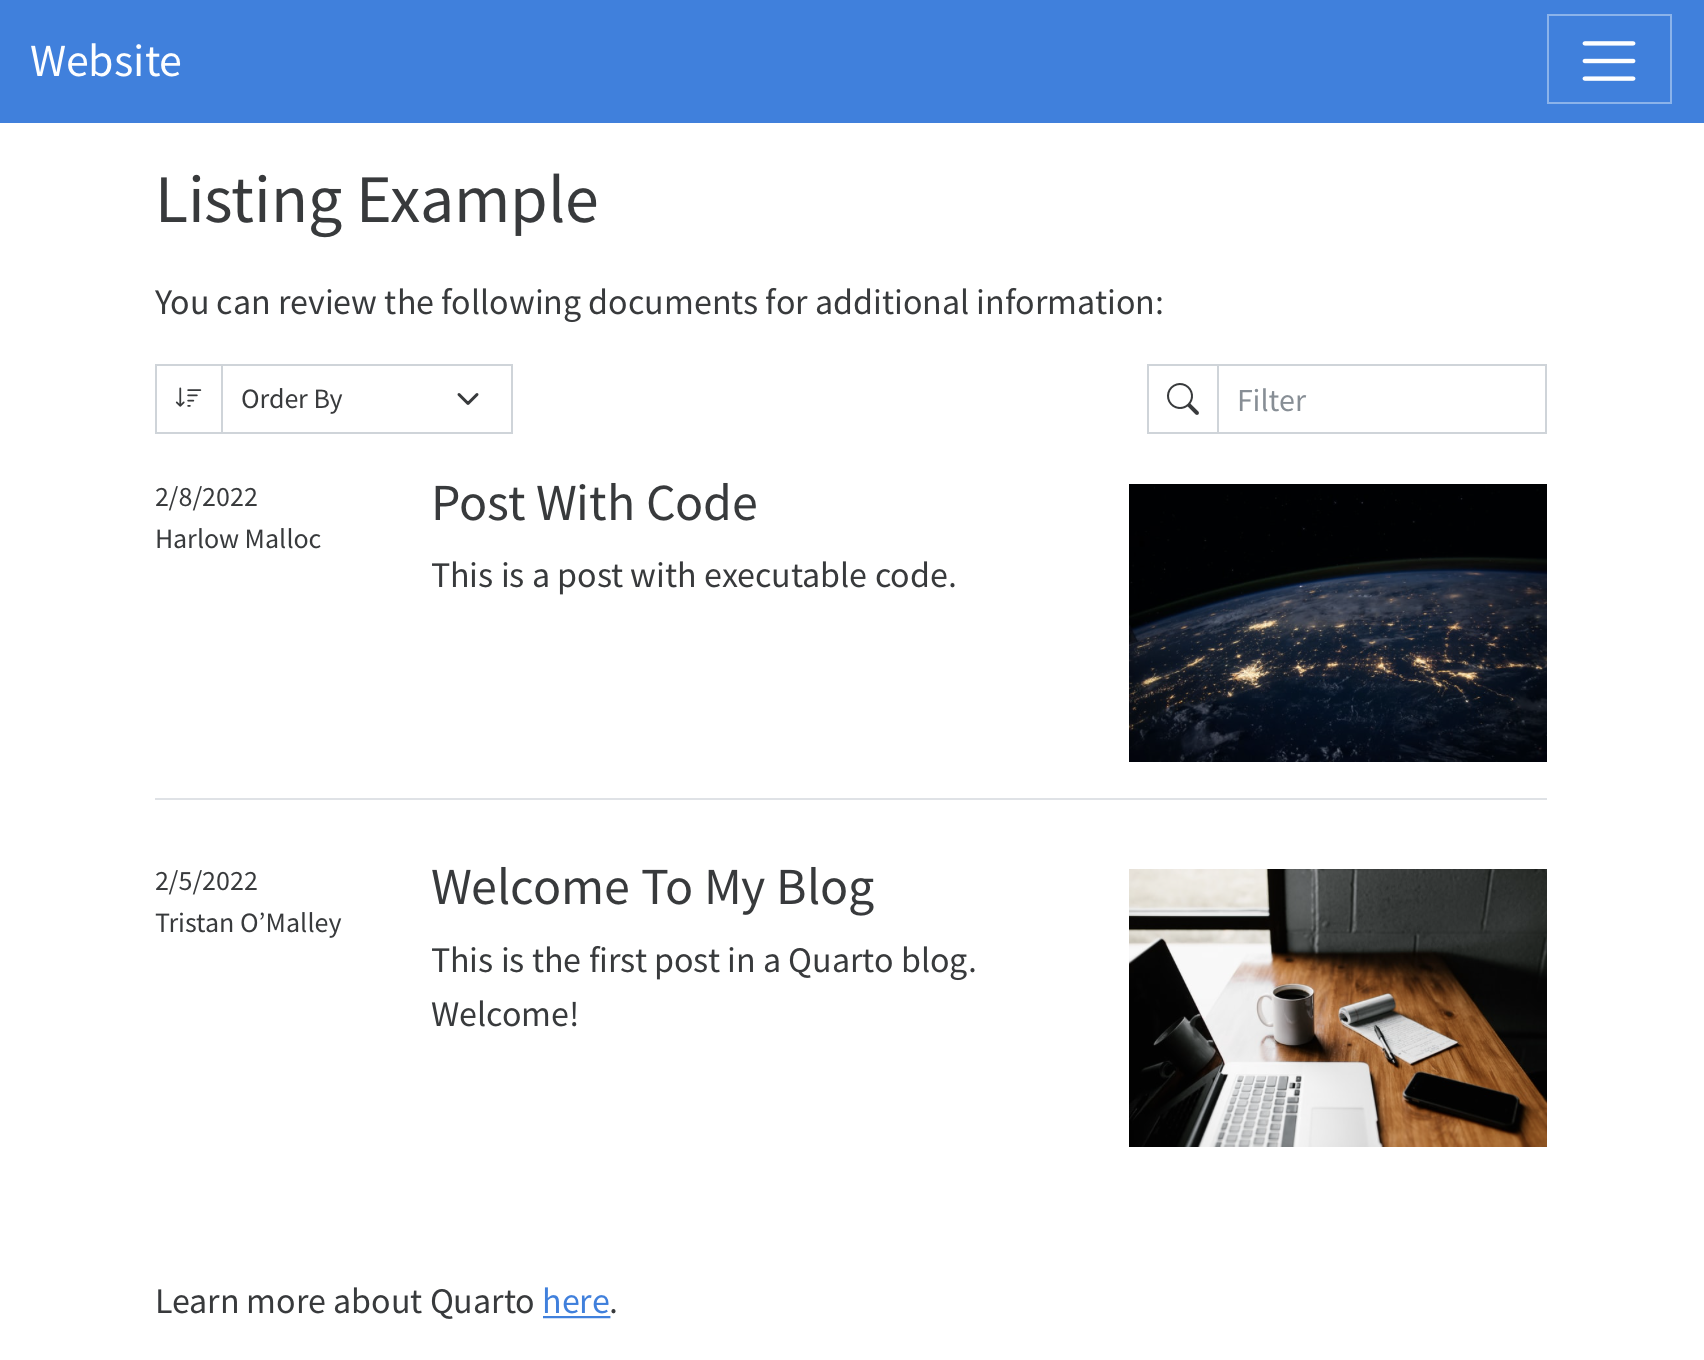 Default layout listings page with a footer that reads 'Learn more about Quarto here'.